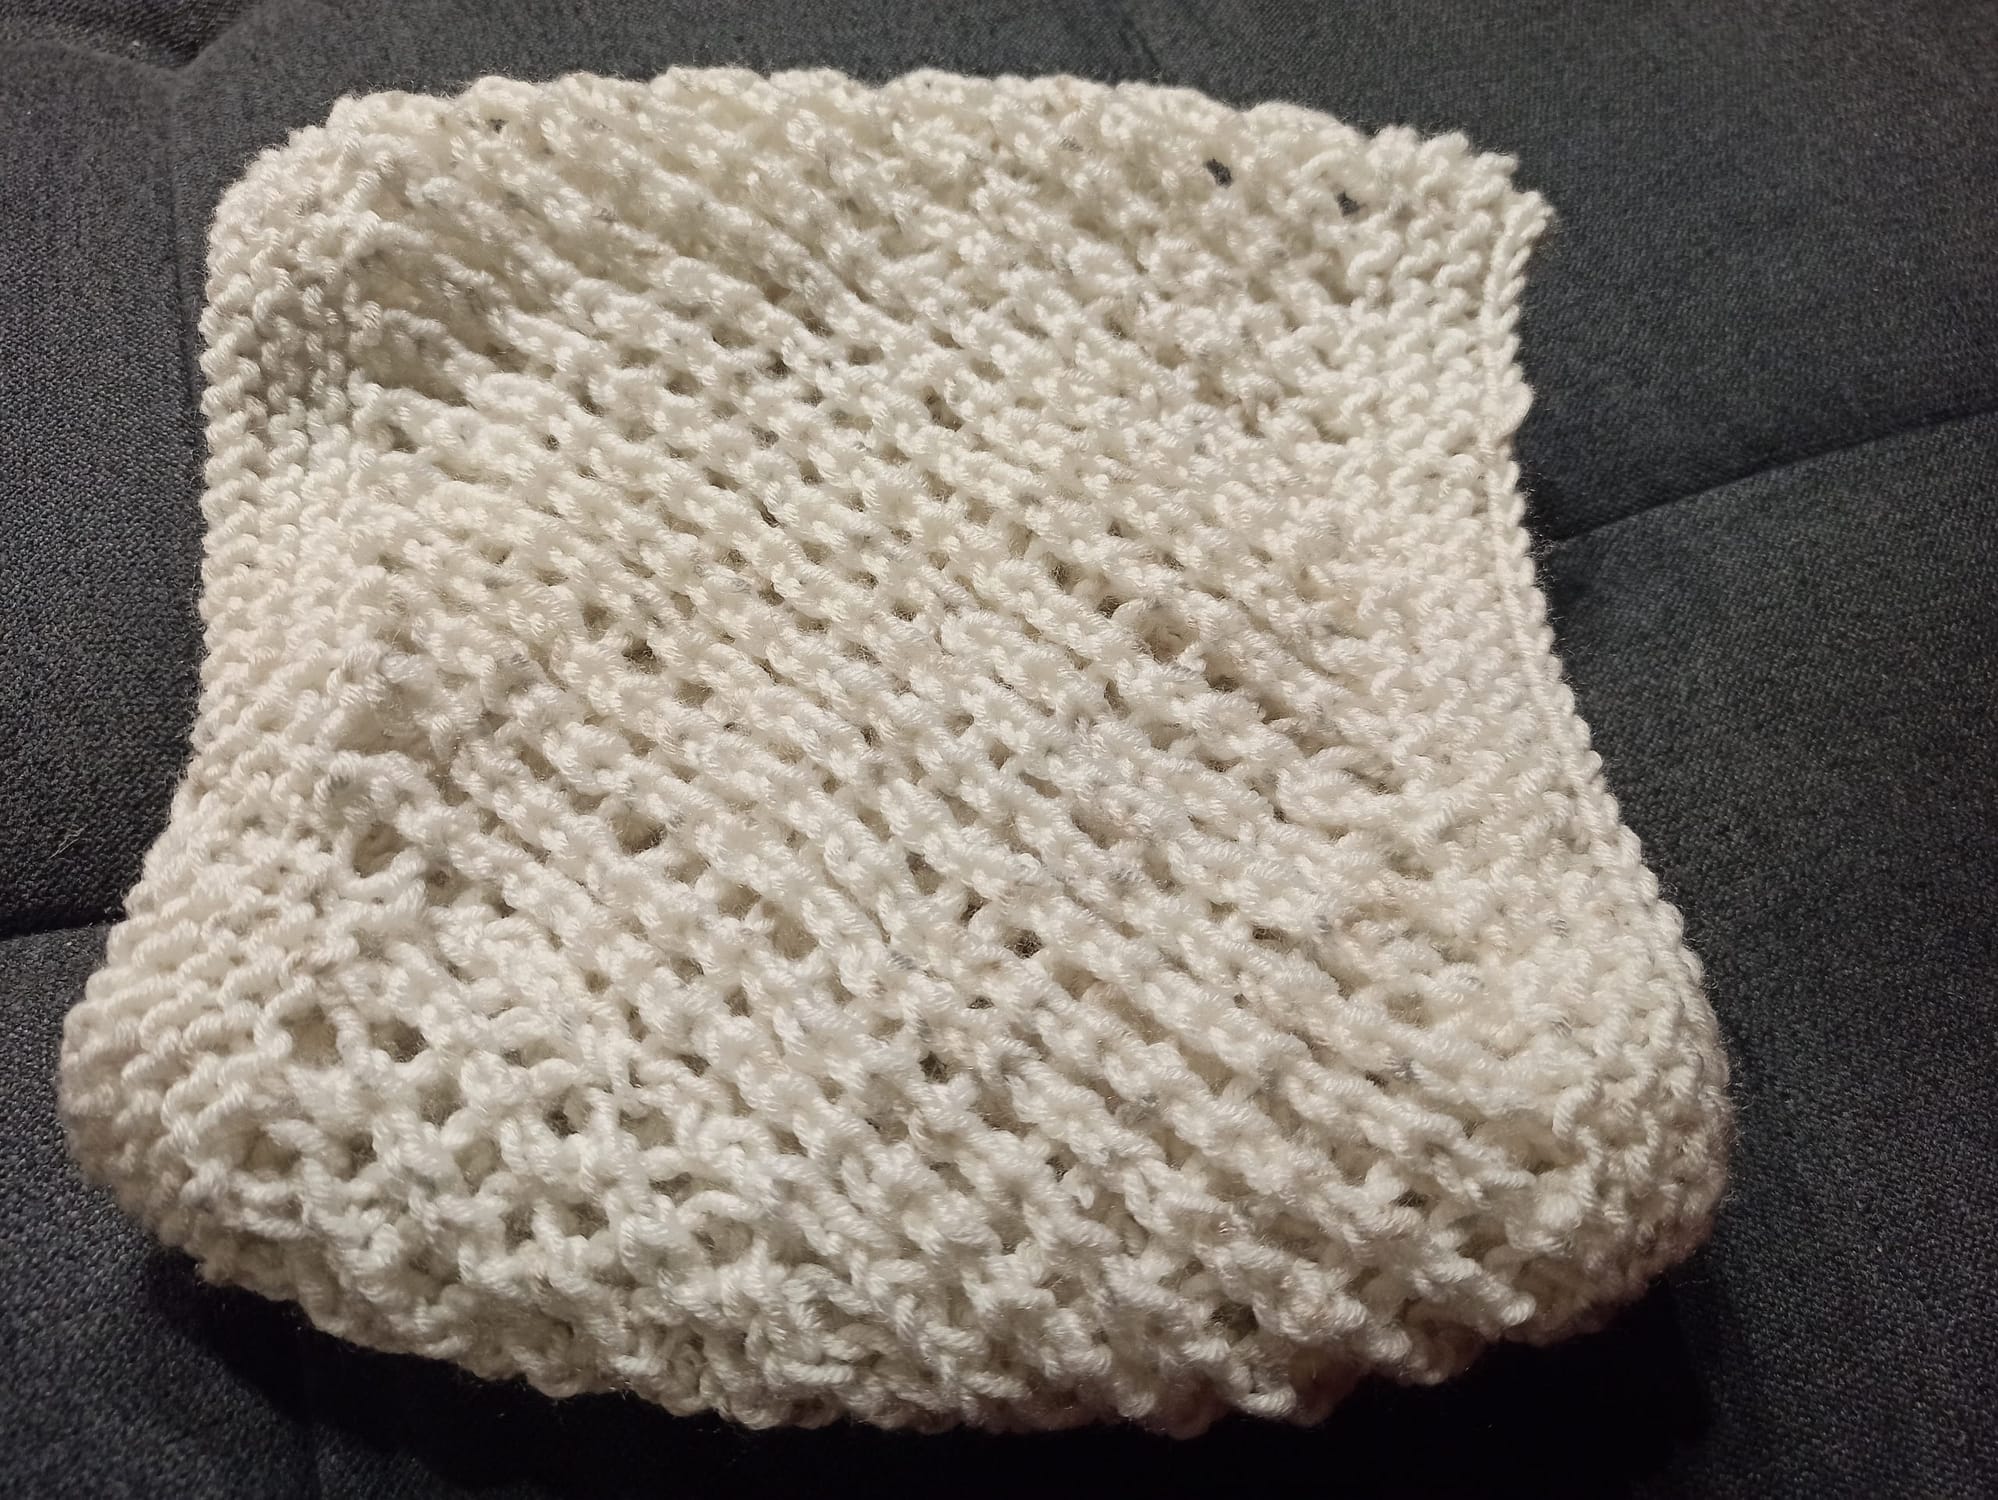 The knit before Christmas - Cowl 5